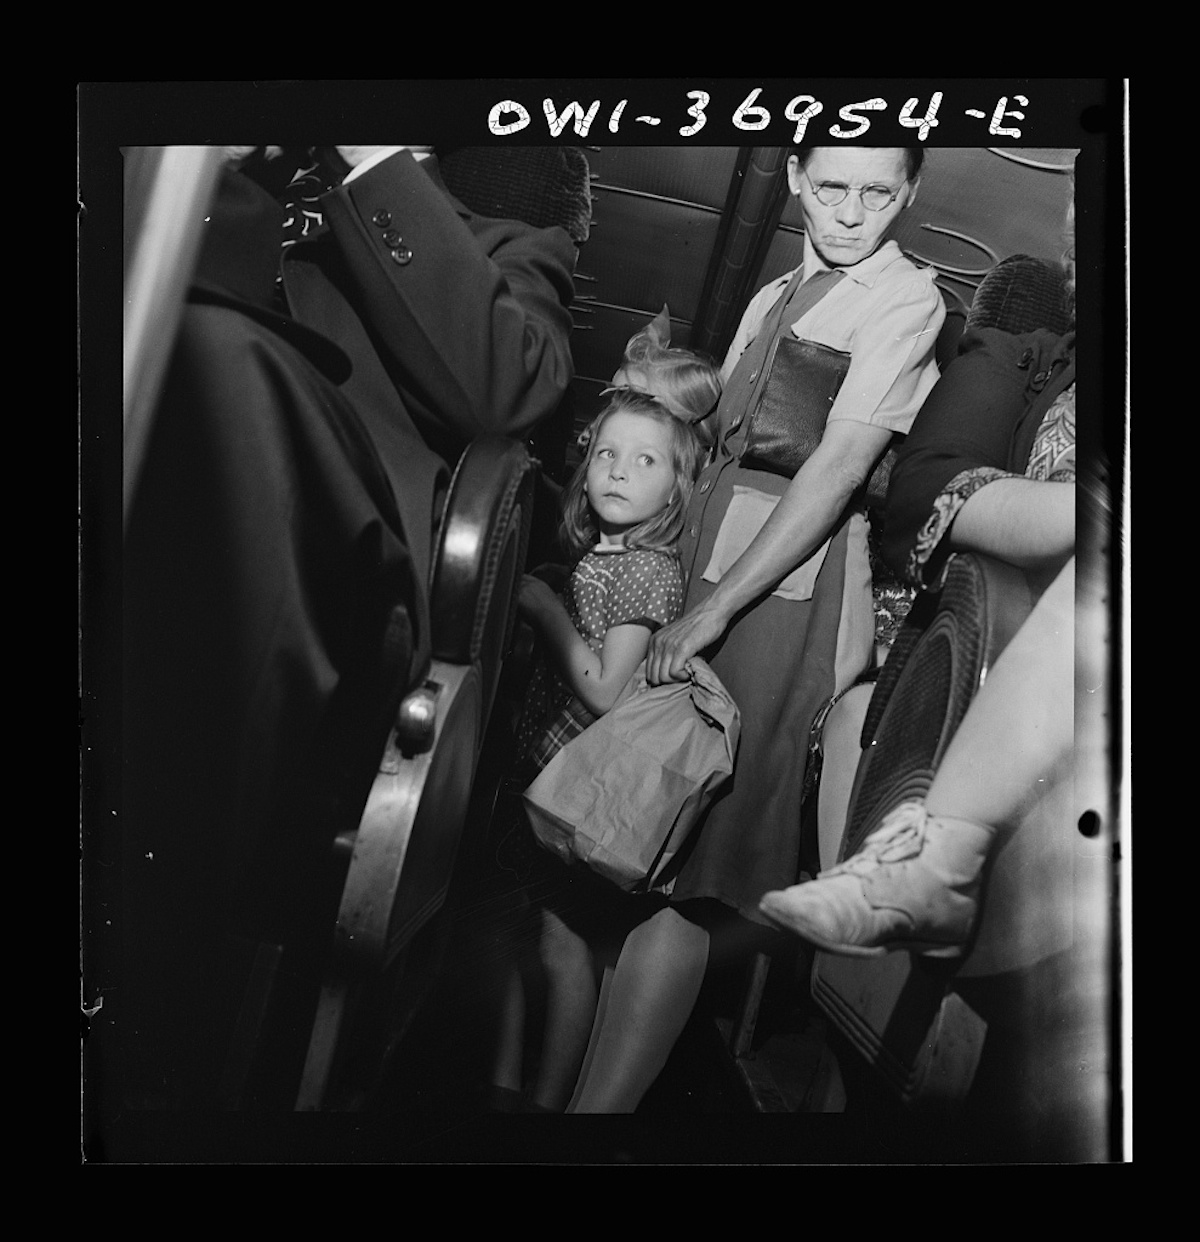 Passengers standing in the aisle of a Greyhound bus going from Washington, D.C. to Pittsburgh, Pennsylvania